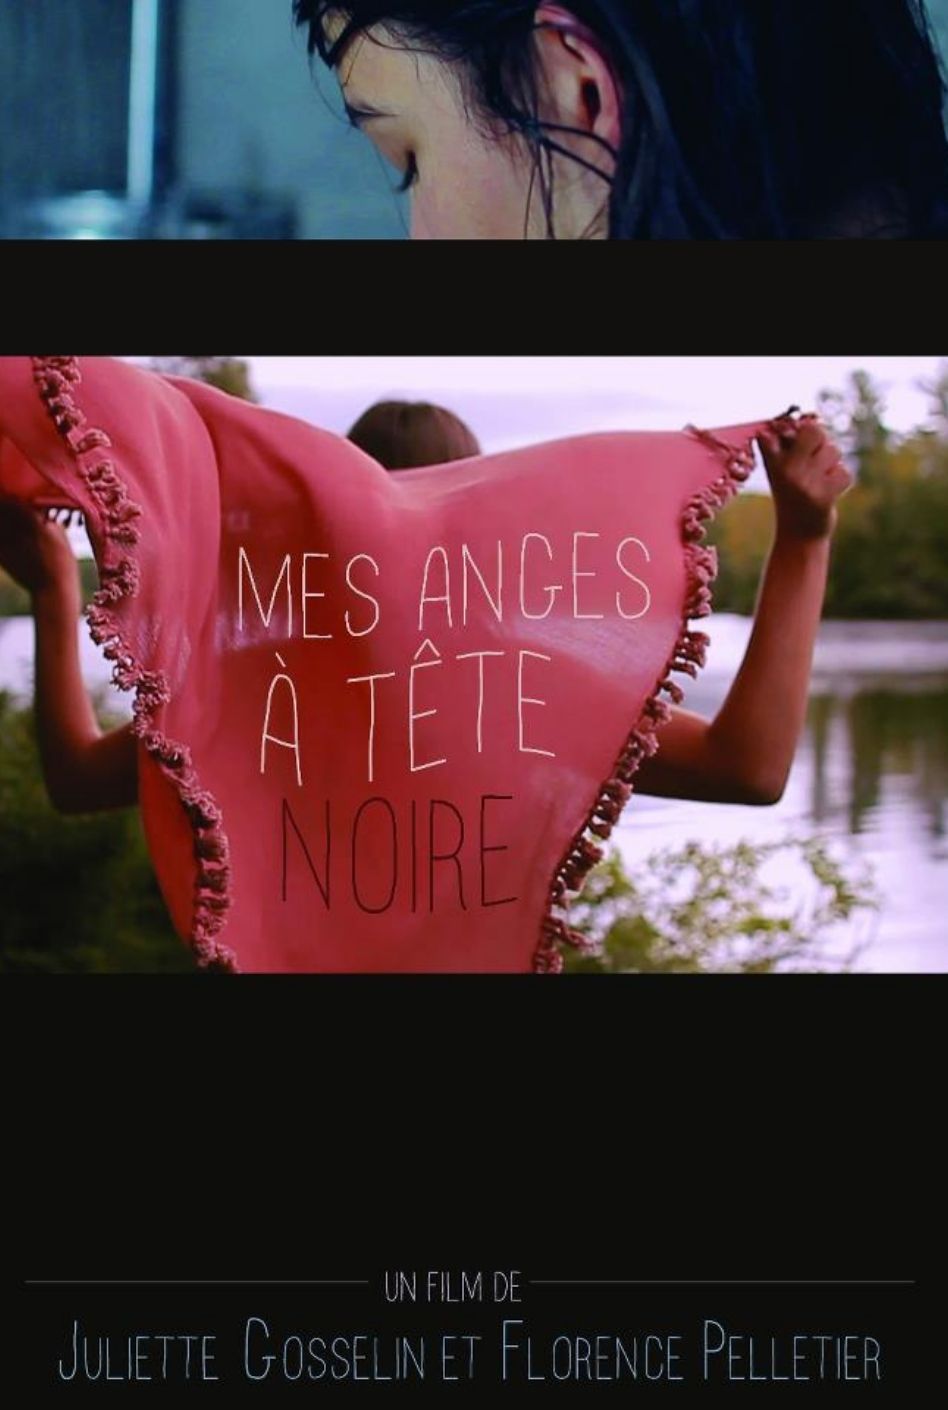 images/bottin_films/e89182a71ddac5547447f5628c6fa933-Mes-anges-a-tete-noire-web.jpg#joomlaImage://local-images/bottin_films/e89182a71ddac5547447f5628c6fa933-Mes-anges-a-tete-noire-web.jpg?width=948&height=1410